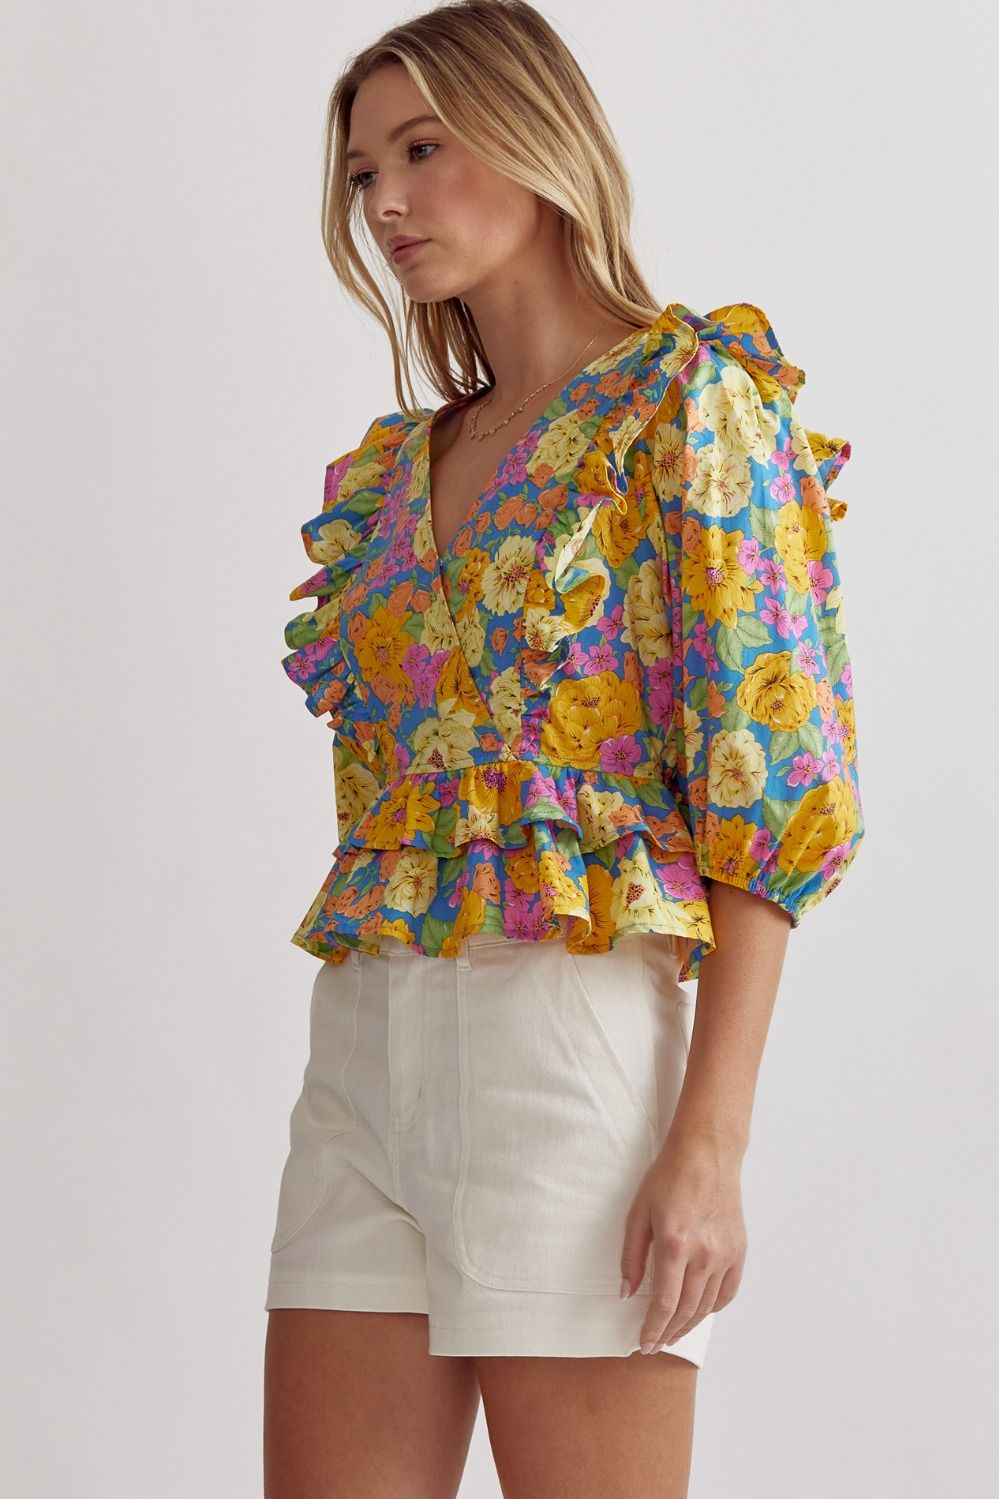 Unleash your inner fashionista with our floral print v-neck peplum top! The stylish 3/4 sleeves and ruffle detail add a touch of femininity while the snap button closure provides convenience. This lightweight and non-sheer top is perfect for any occasion - from casual gatherings to dressy events!